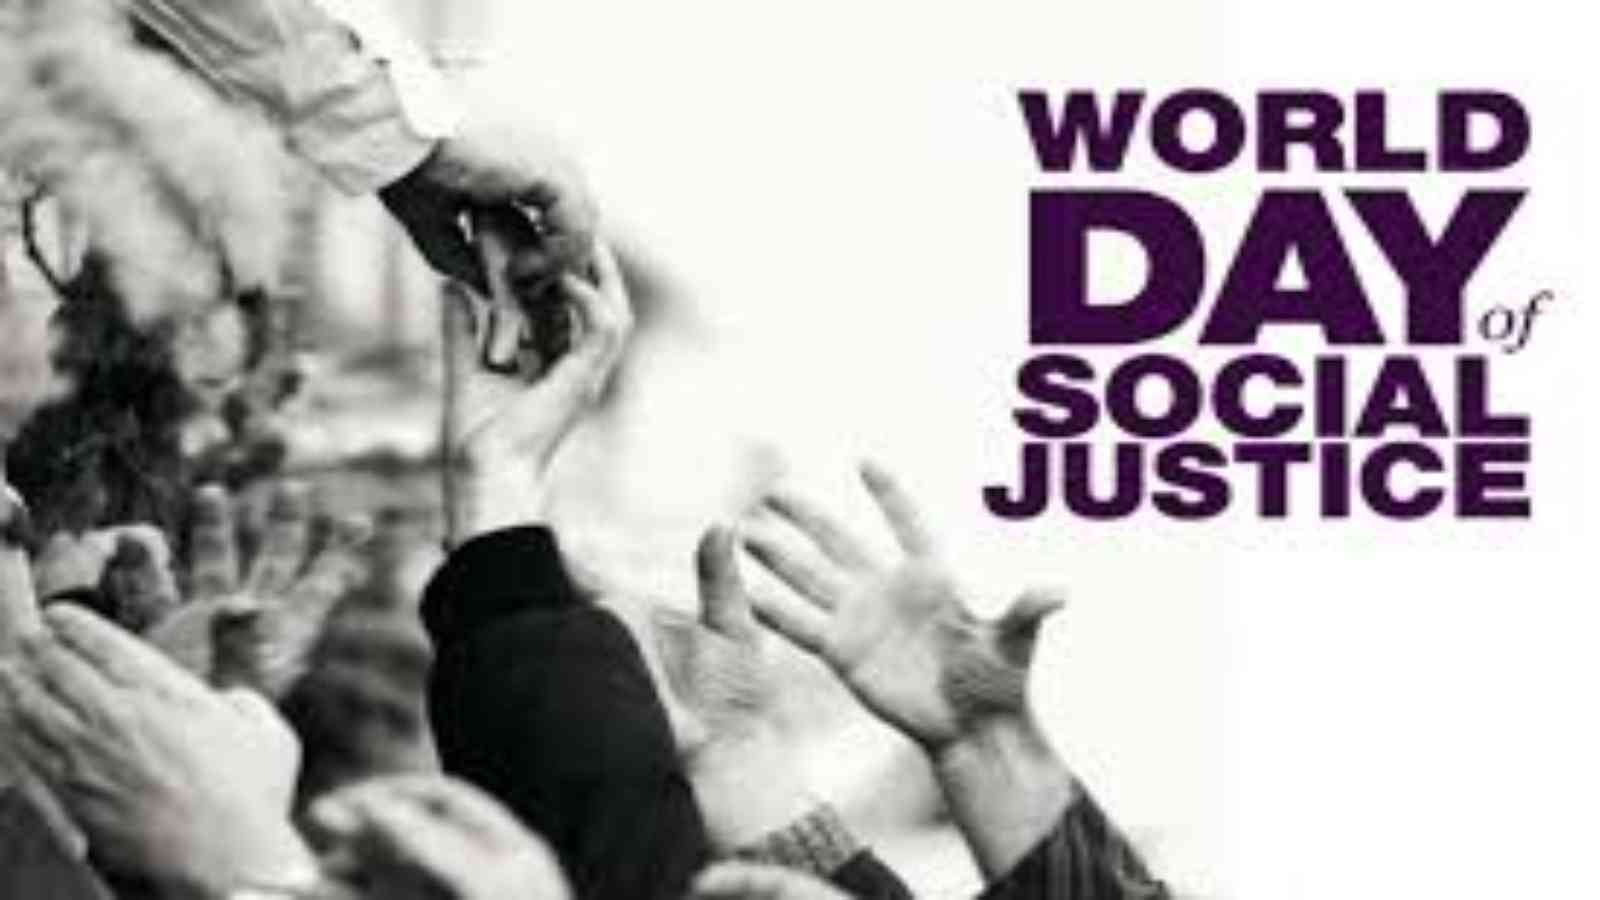 World Day of Social Justice 2023: Date, Background, Facts